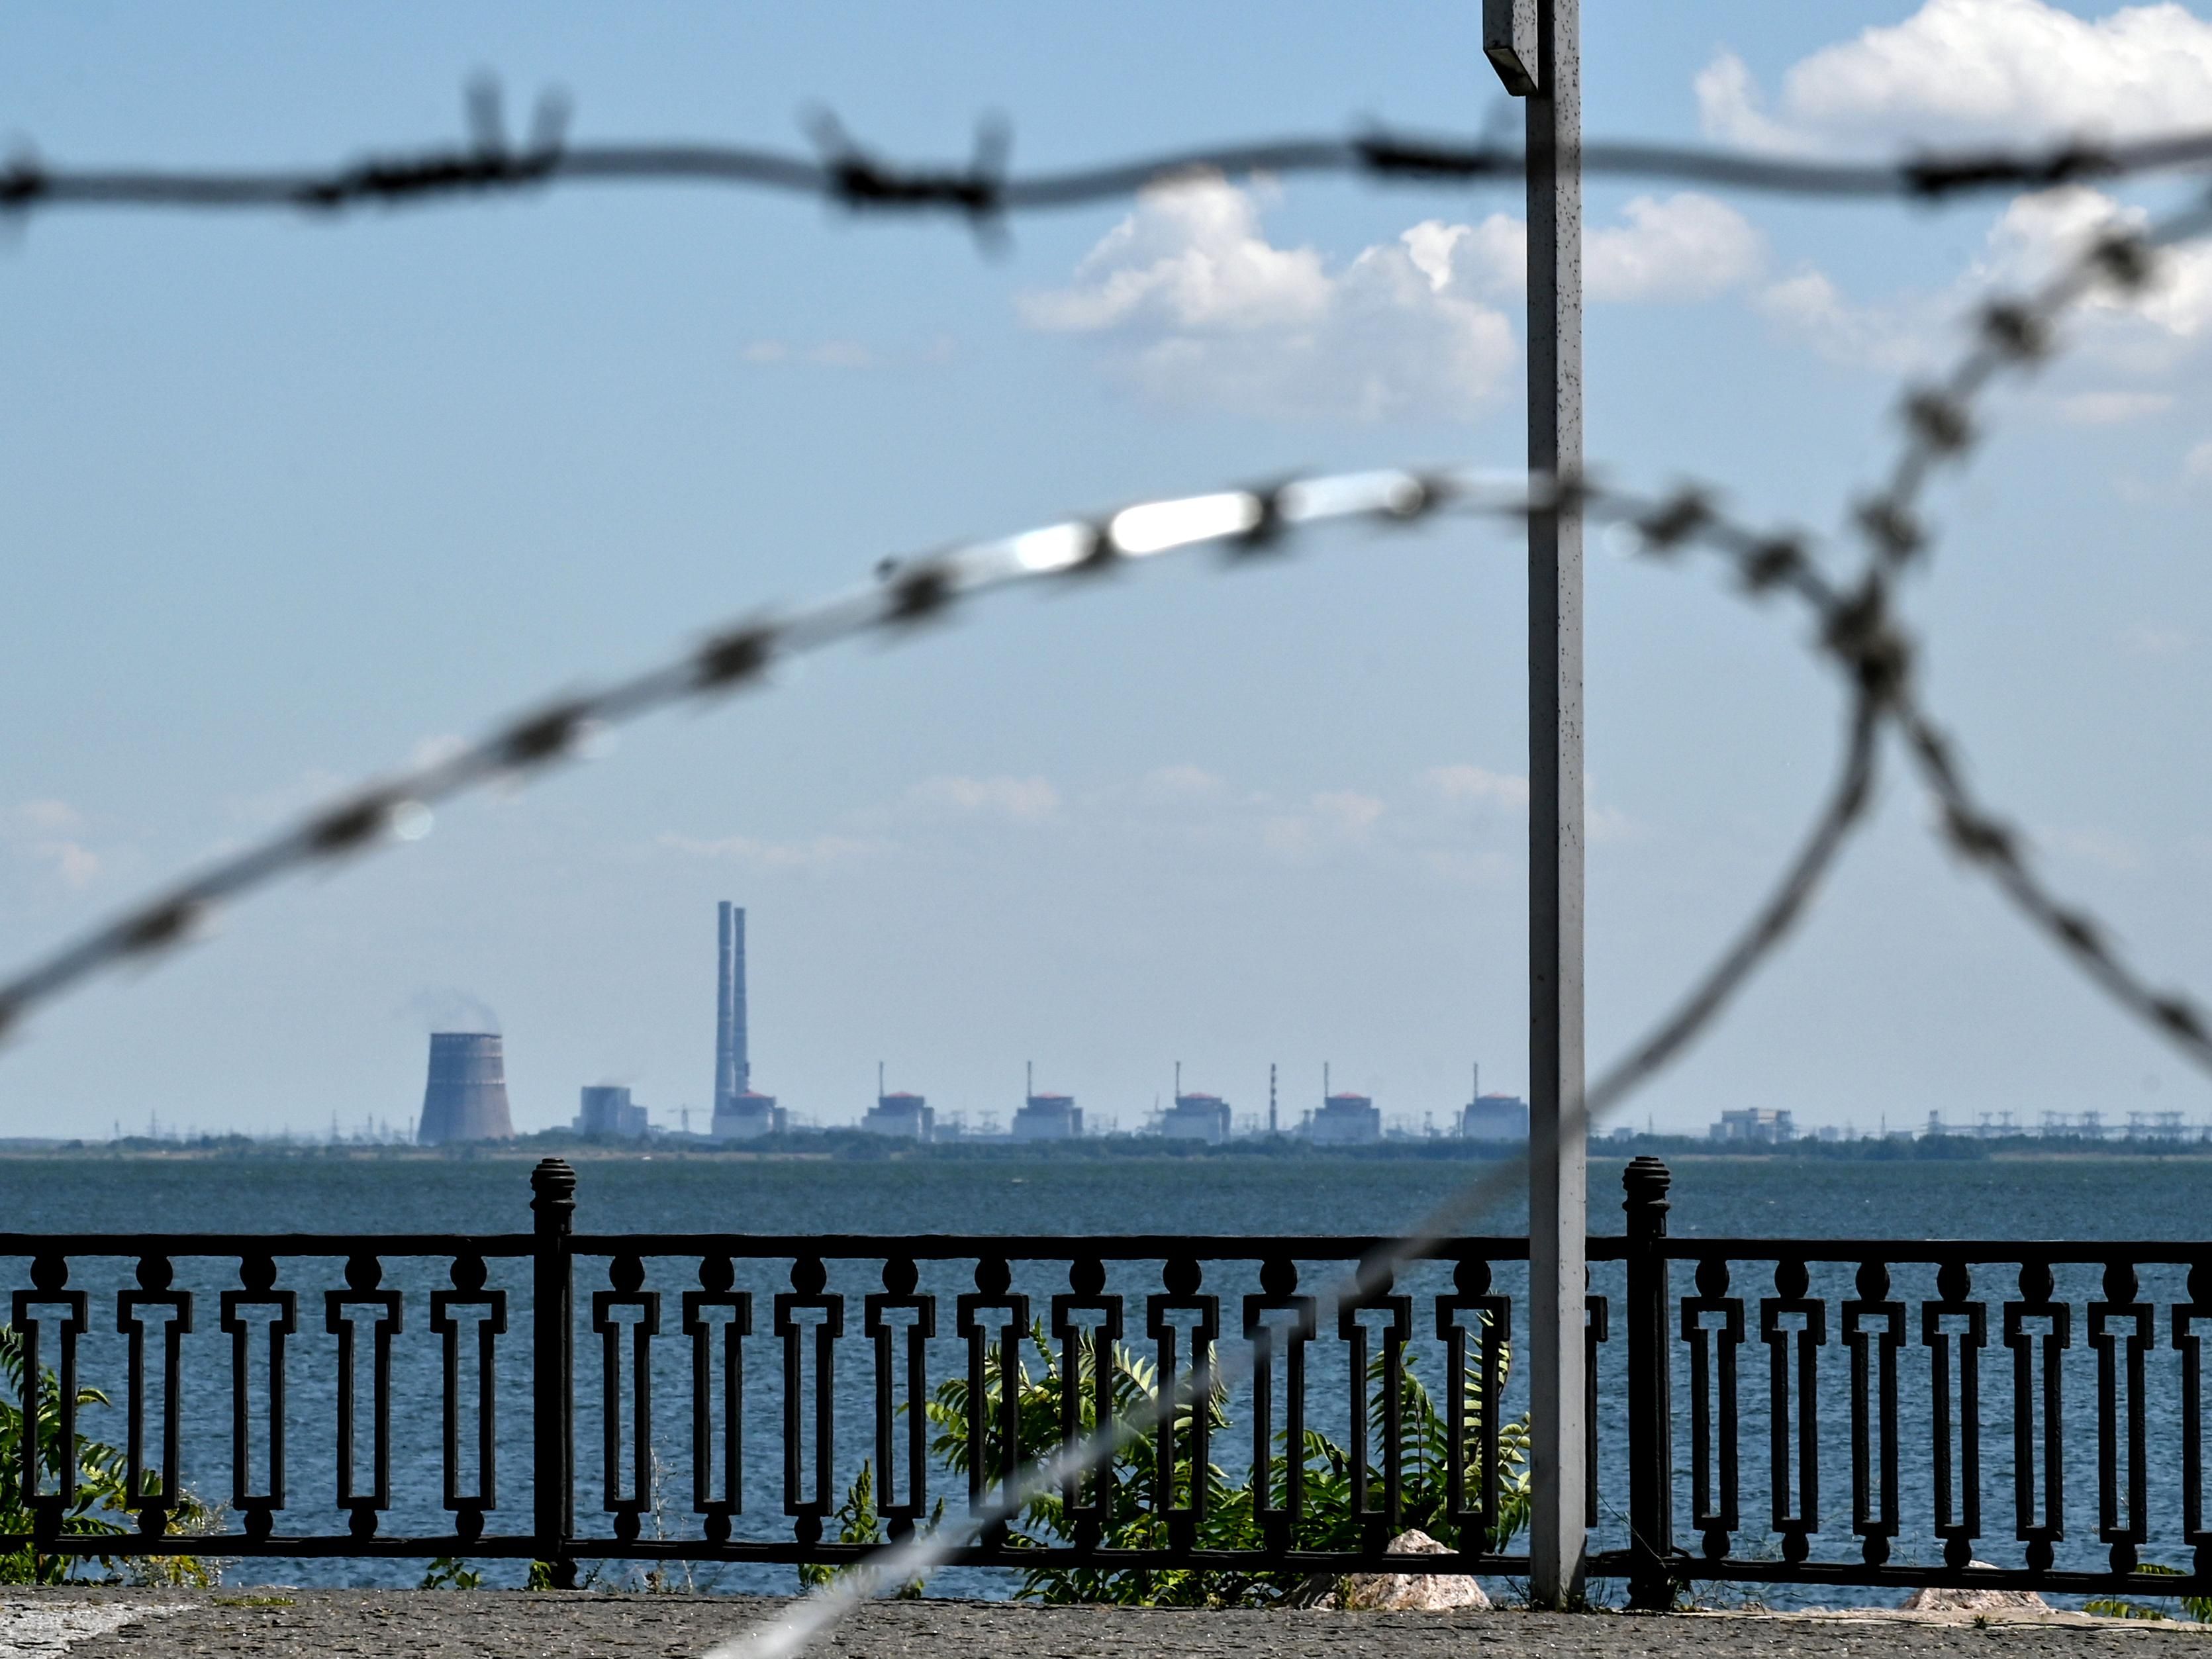 Barbed wire in the foreground frames a power plant in the distance across a wide river.